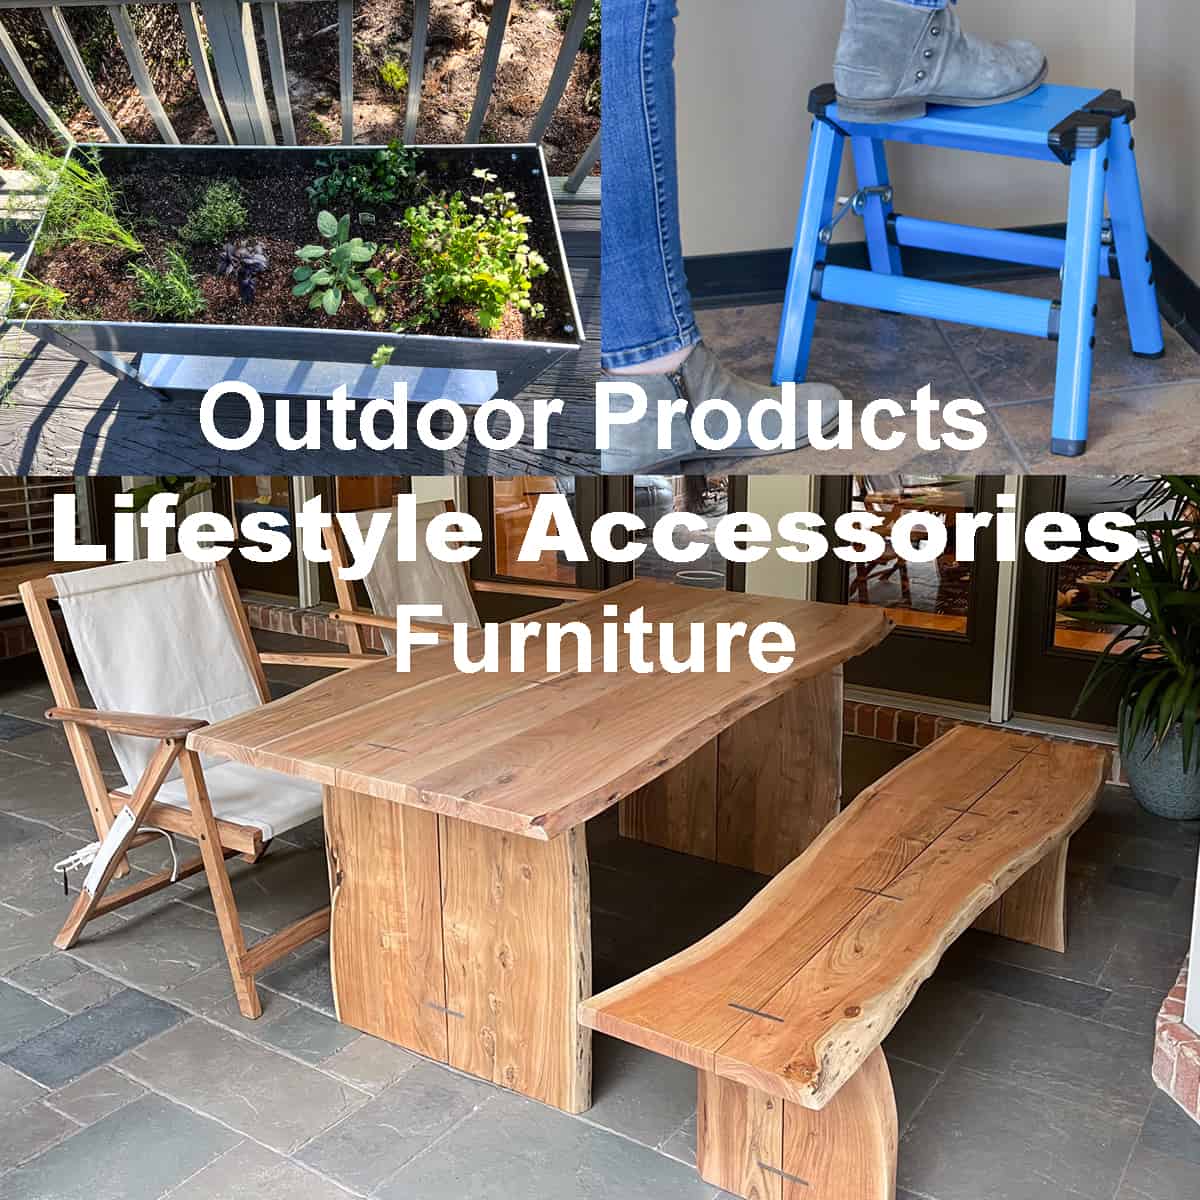 AmeriHome Furniture, Outdoor Products and Lifestyle Accessories